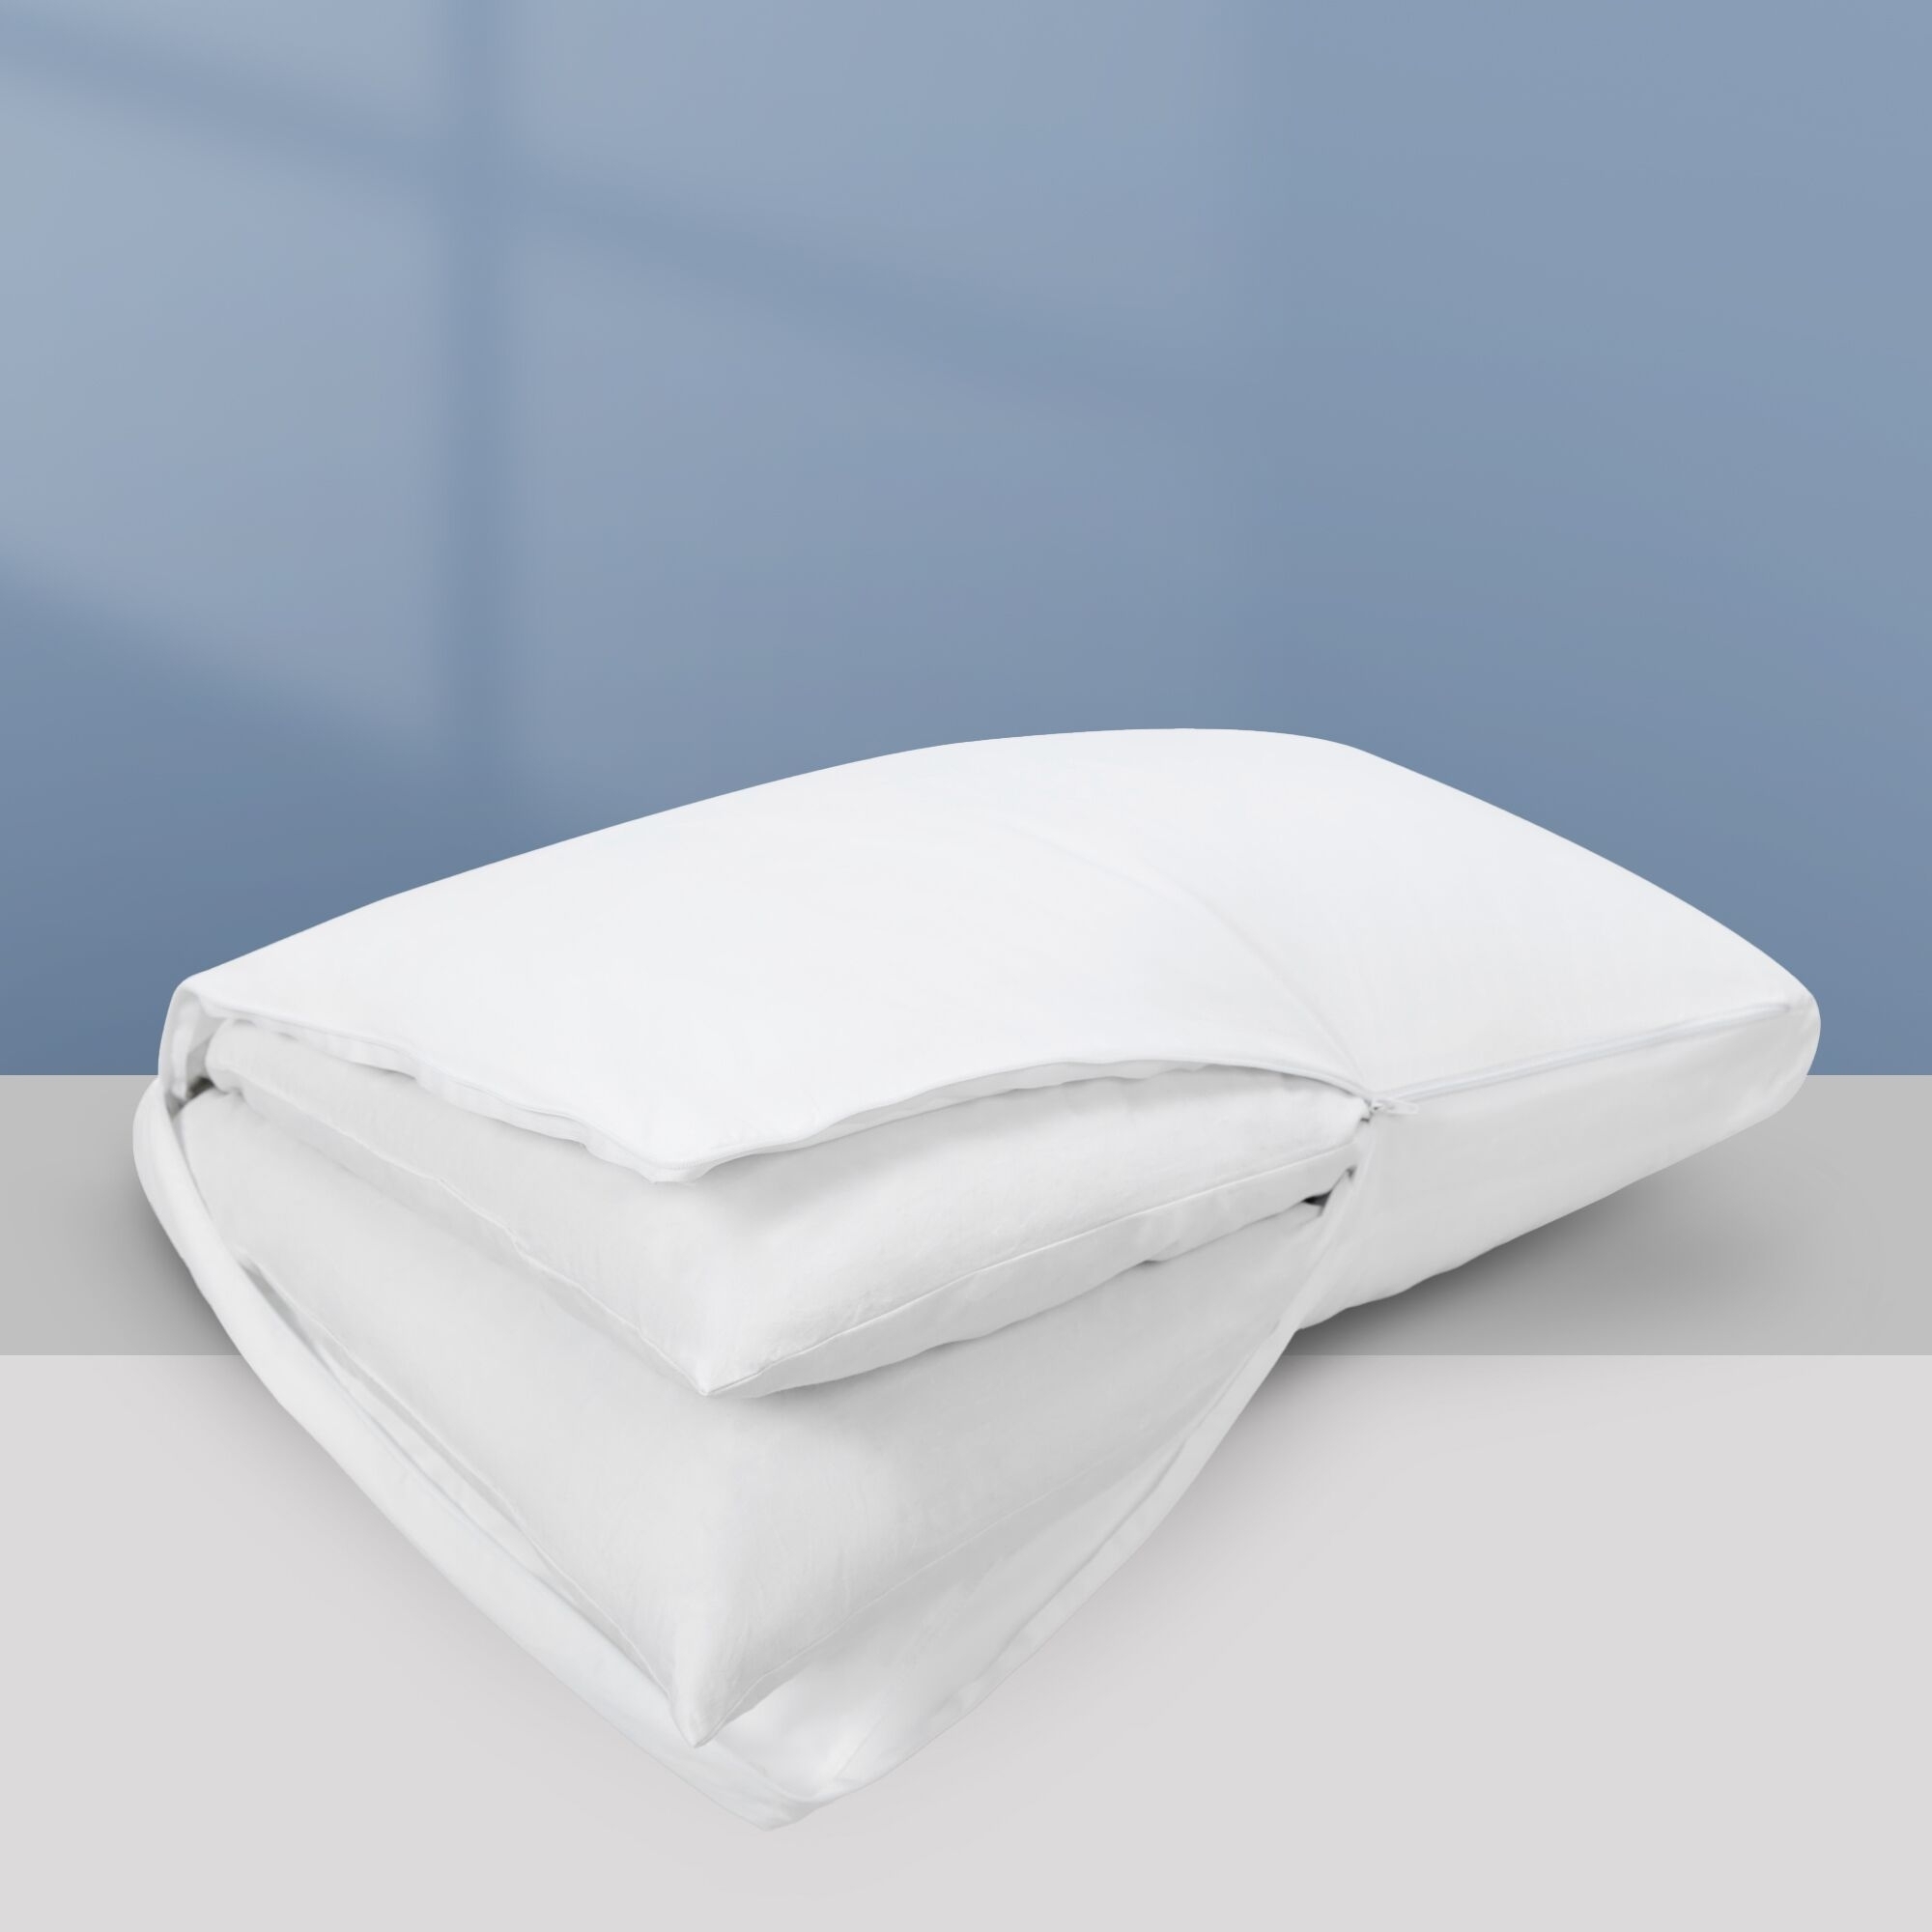 Six-in-one Down Feather Adjustable Pillow Cotton Shell